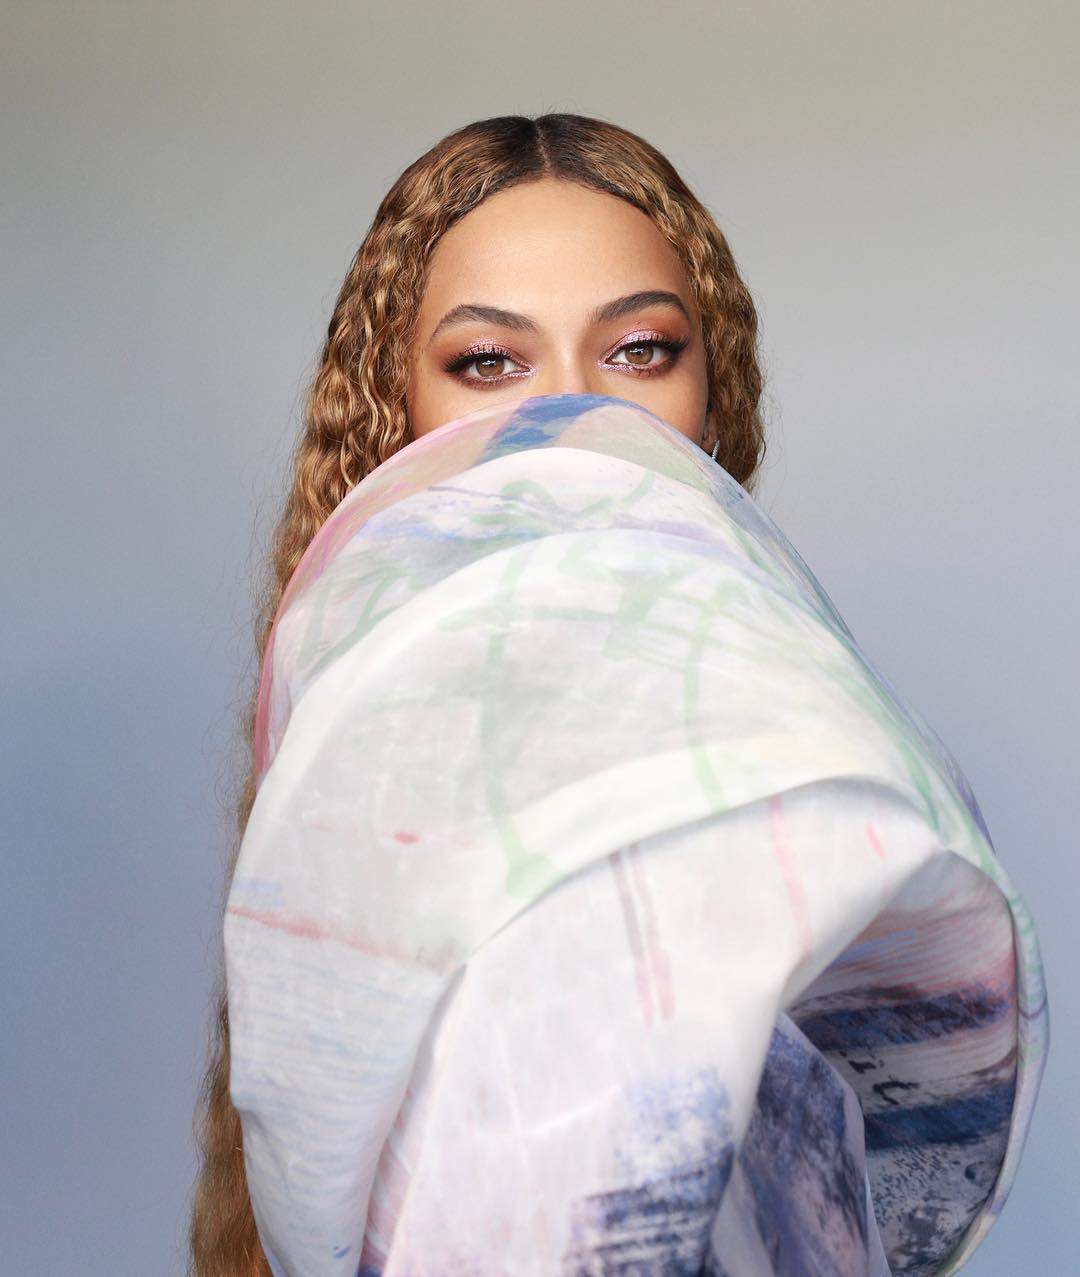 Photos: Beyonce came, saw & SLAYED at the 2019 Roc Nation Pre-Grammy Brunch